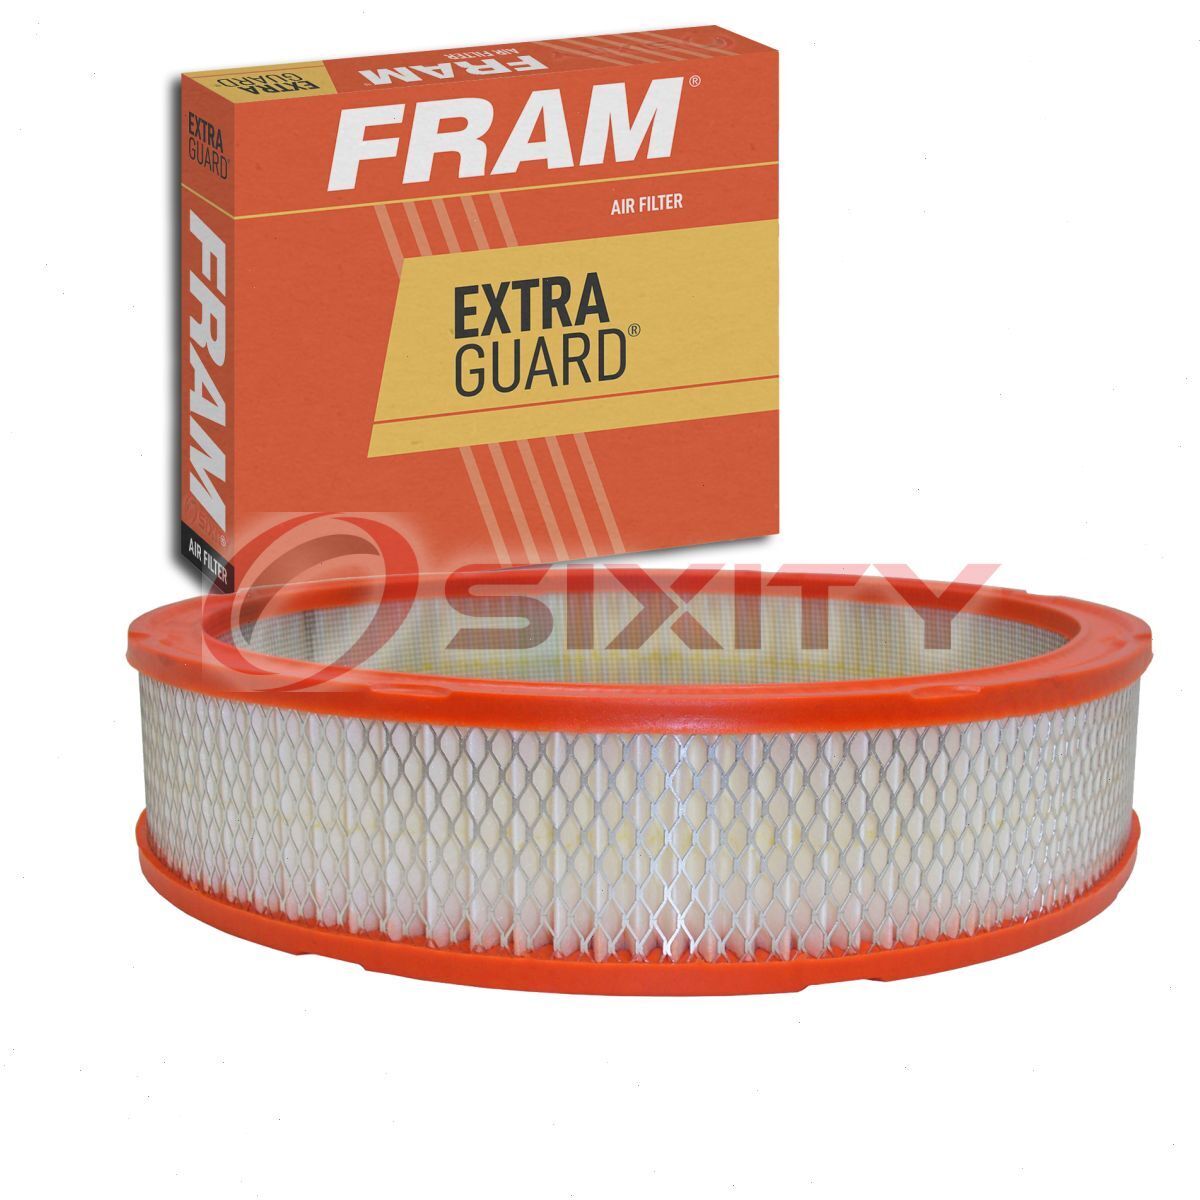 FRAM Extra Guard Air Filter for 1968-1971 Plymouth Belvedere Intake Inlet kb